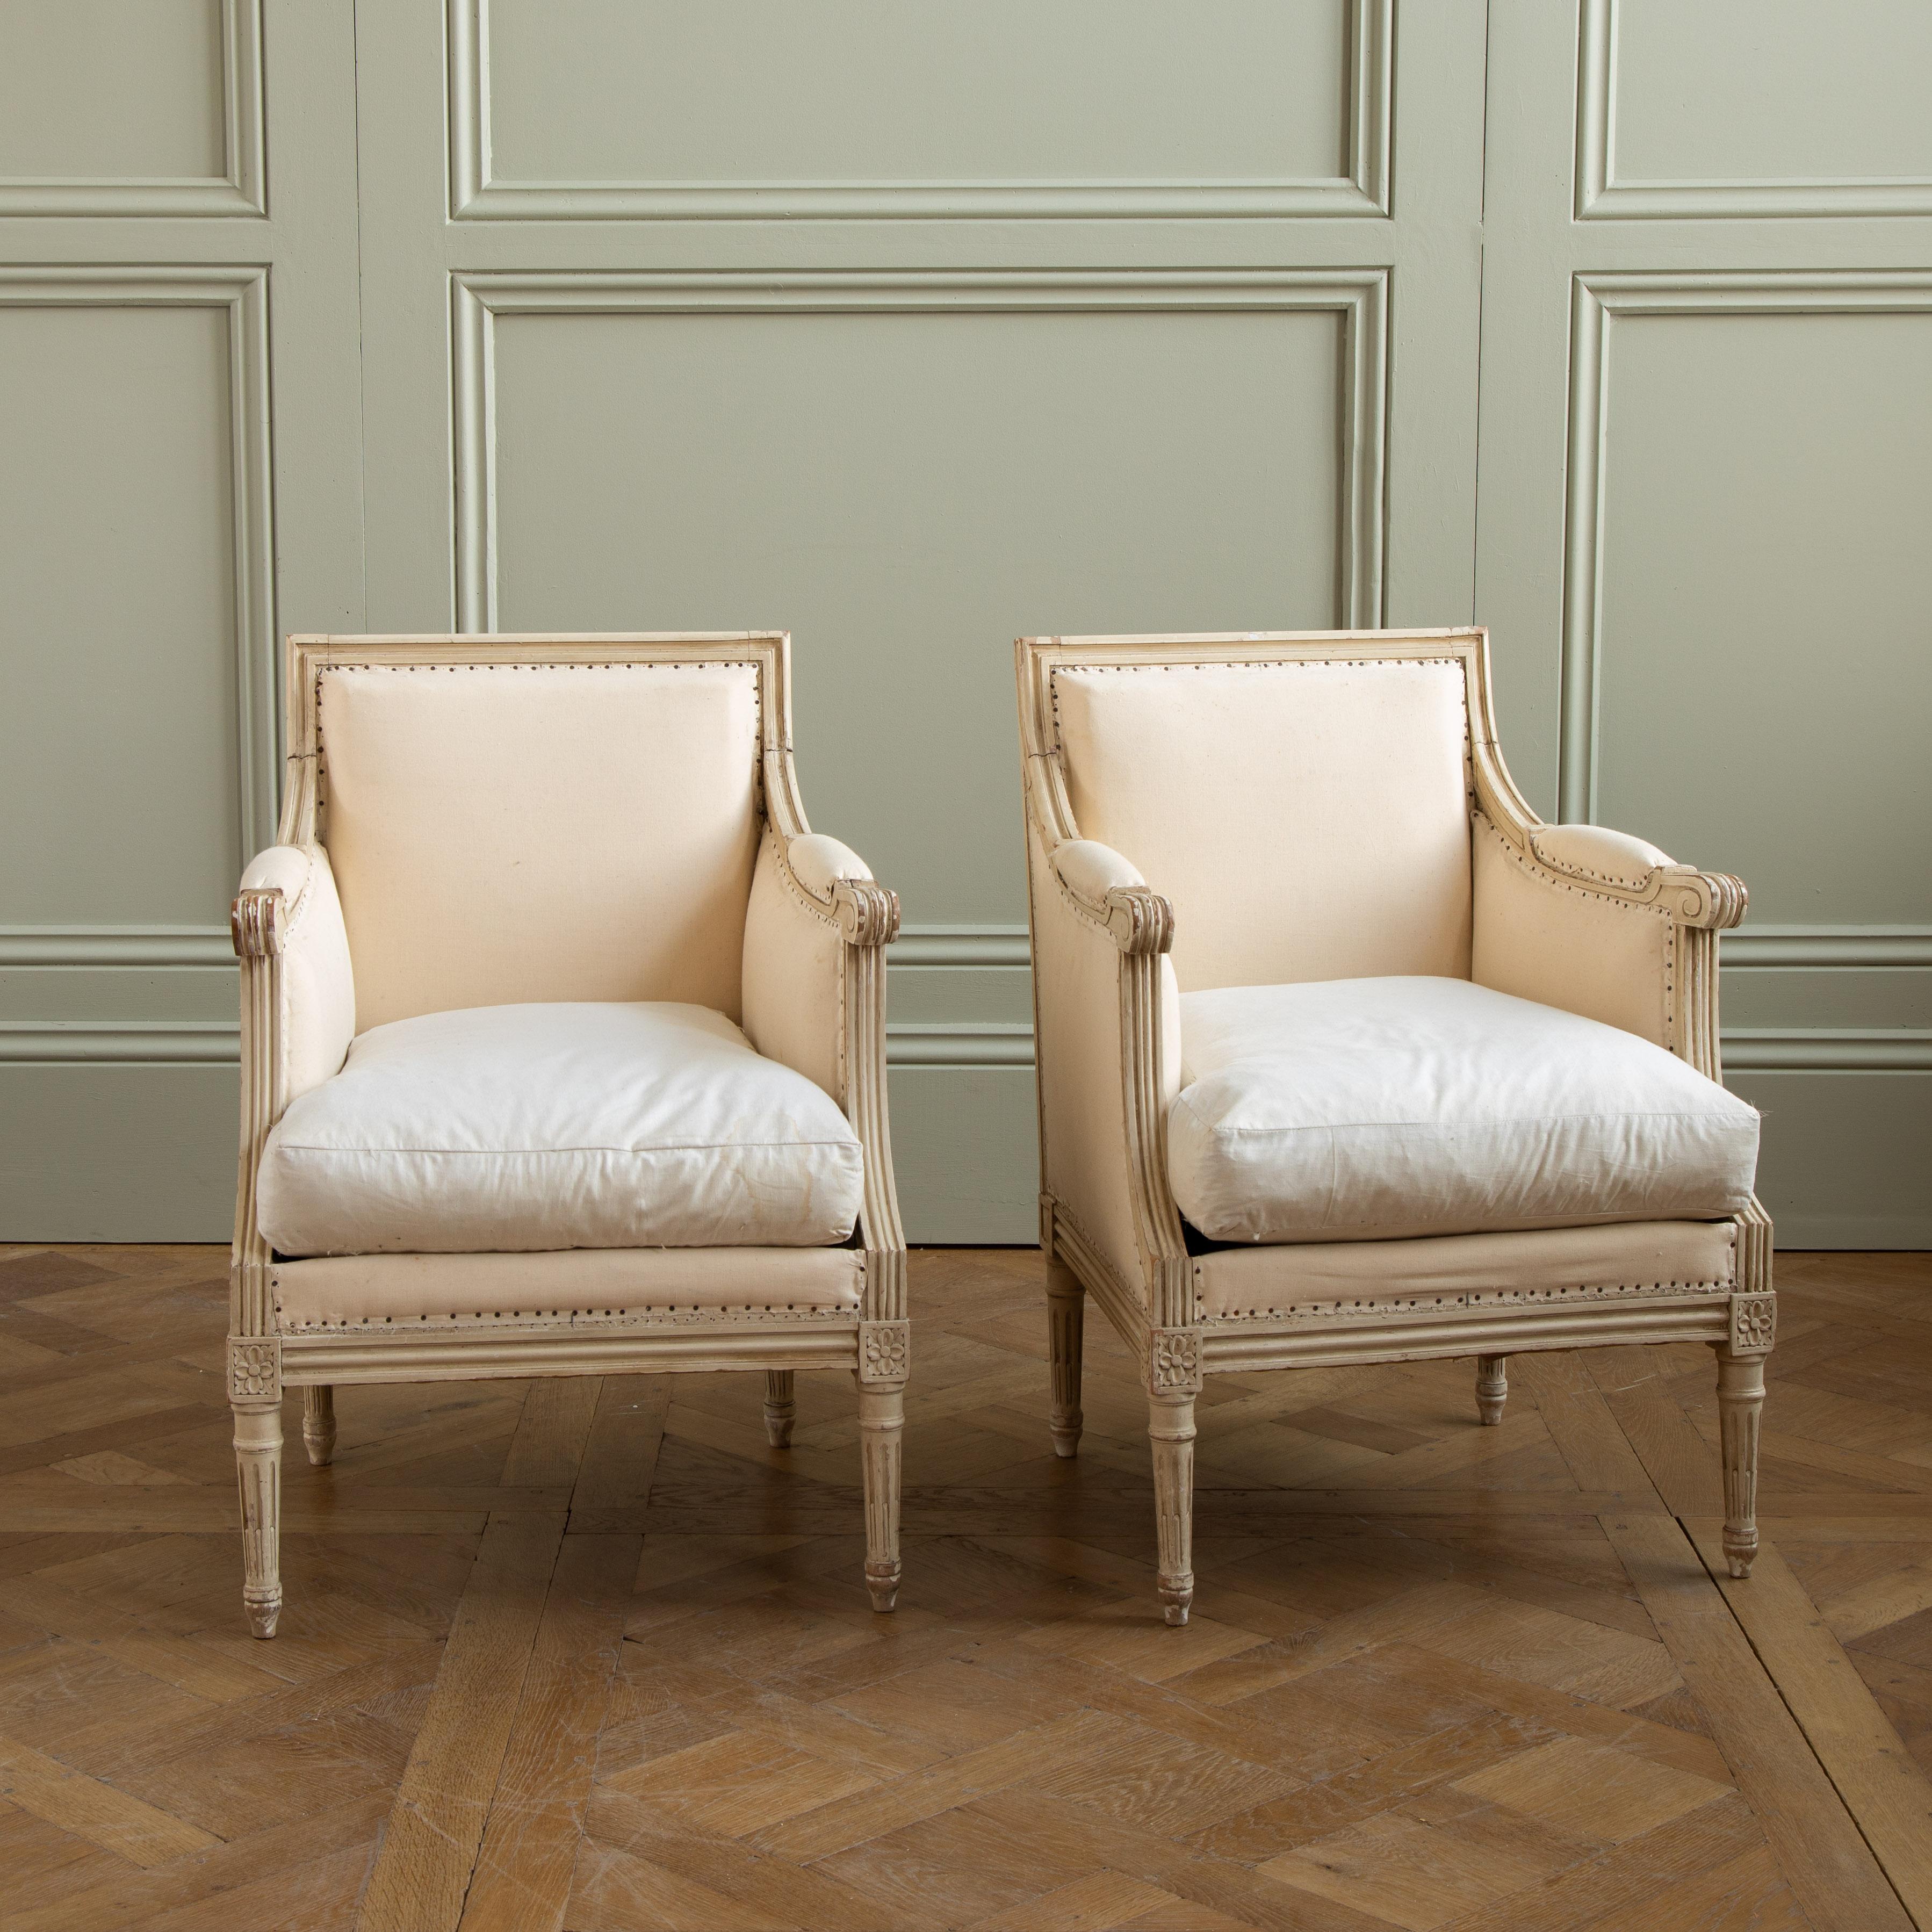 Upholstery Pair Of French 19th Century Hand Painted Bergere Chairs In Antique White Patina